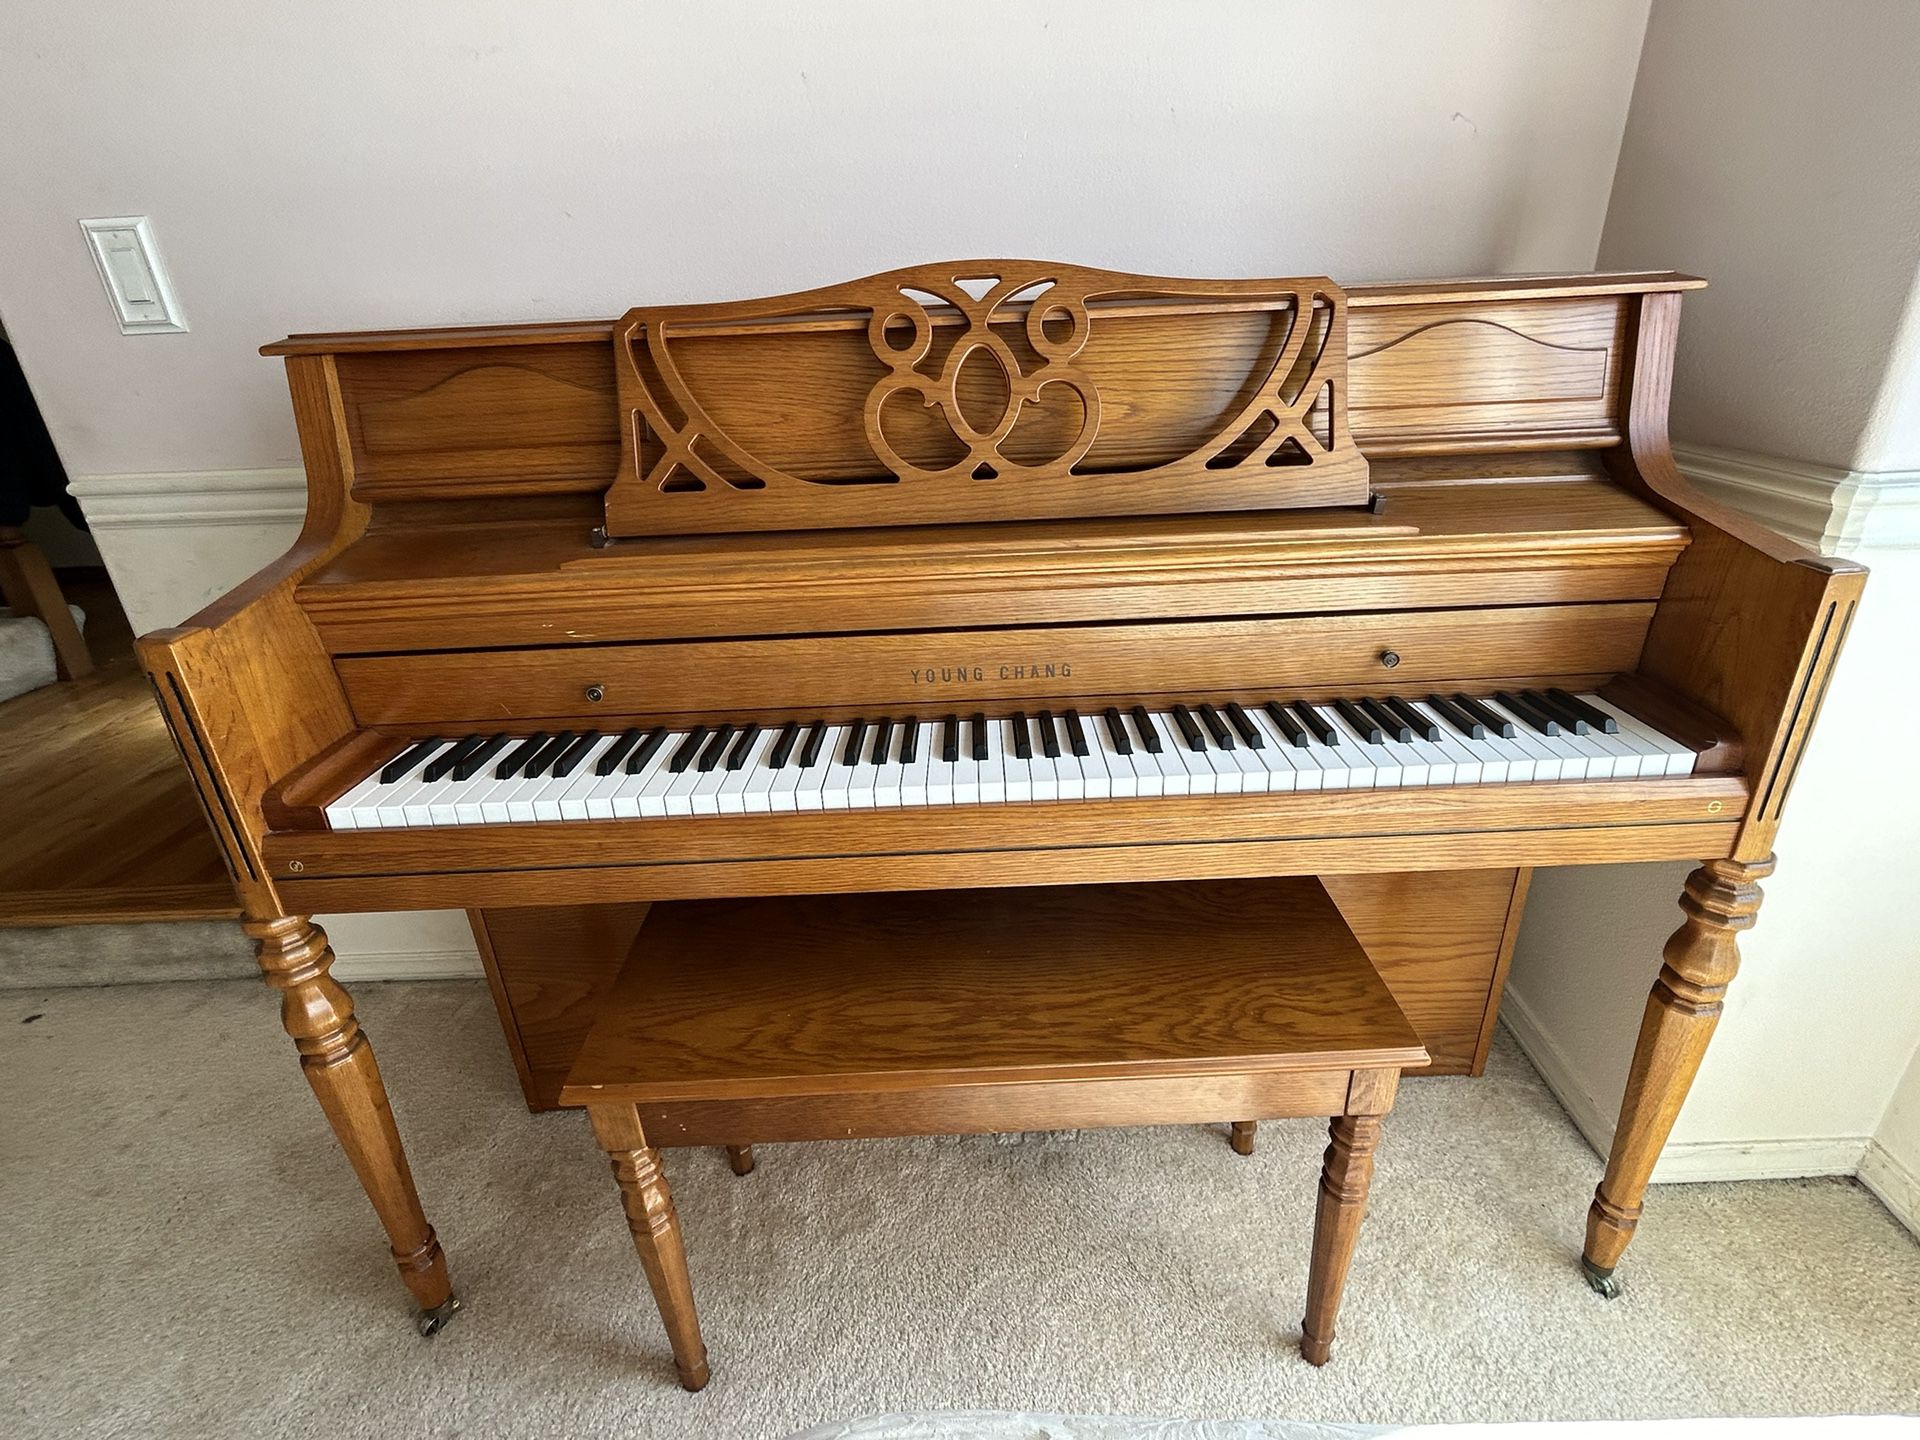 42” Young Chang Console Piano